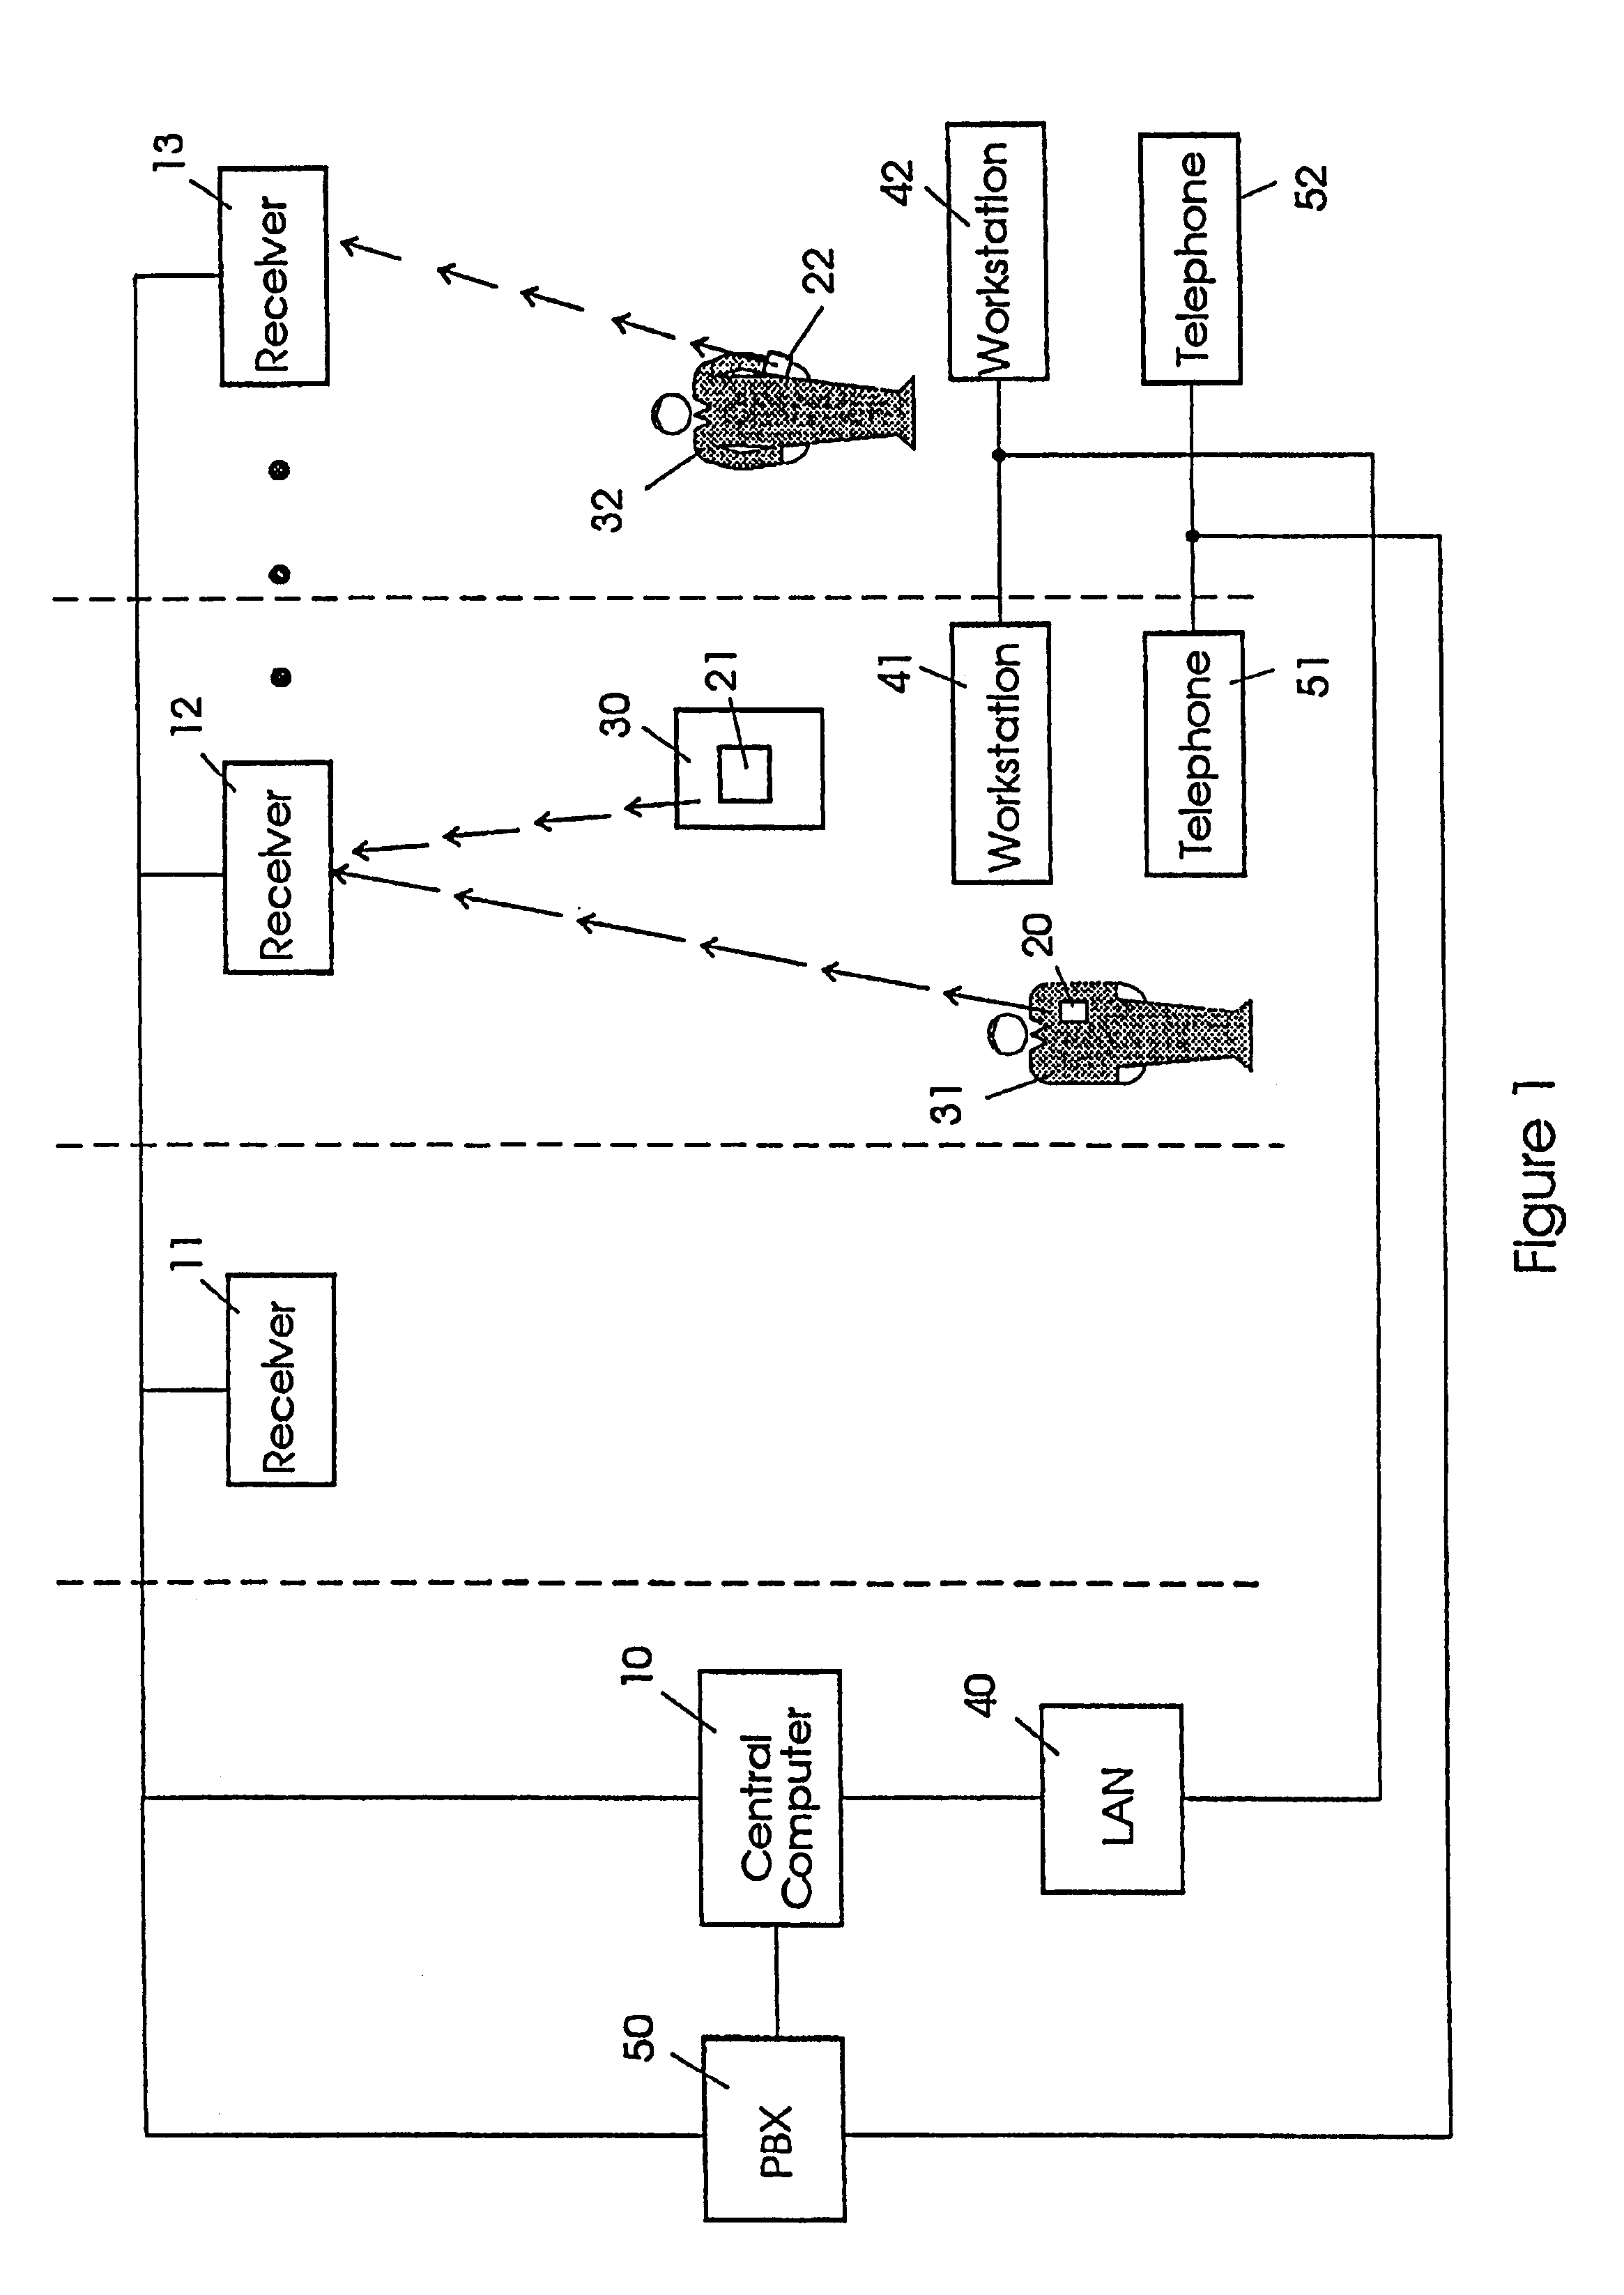 System for identifying object locations